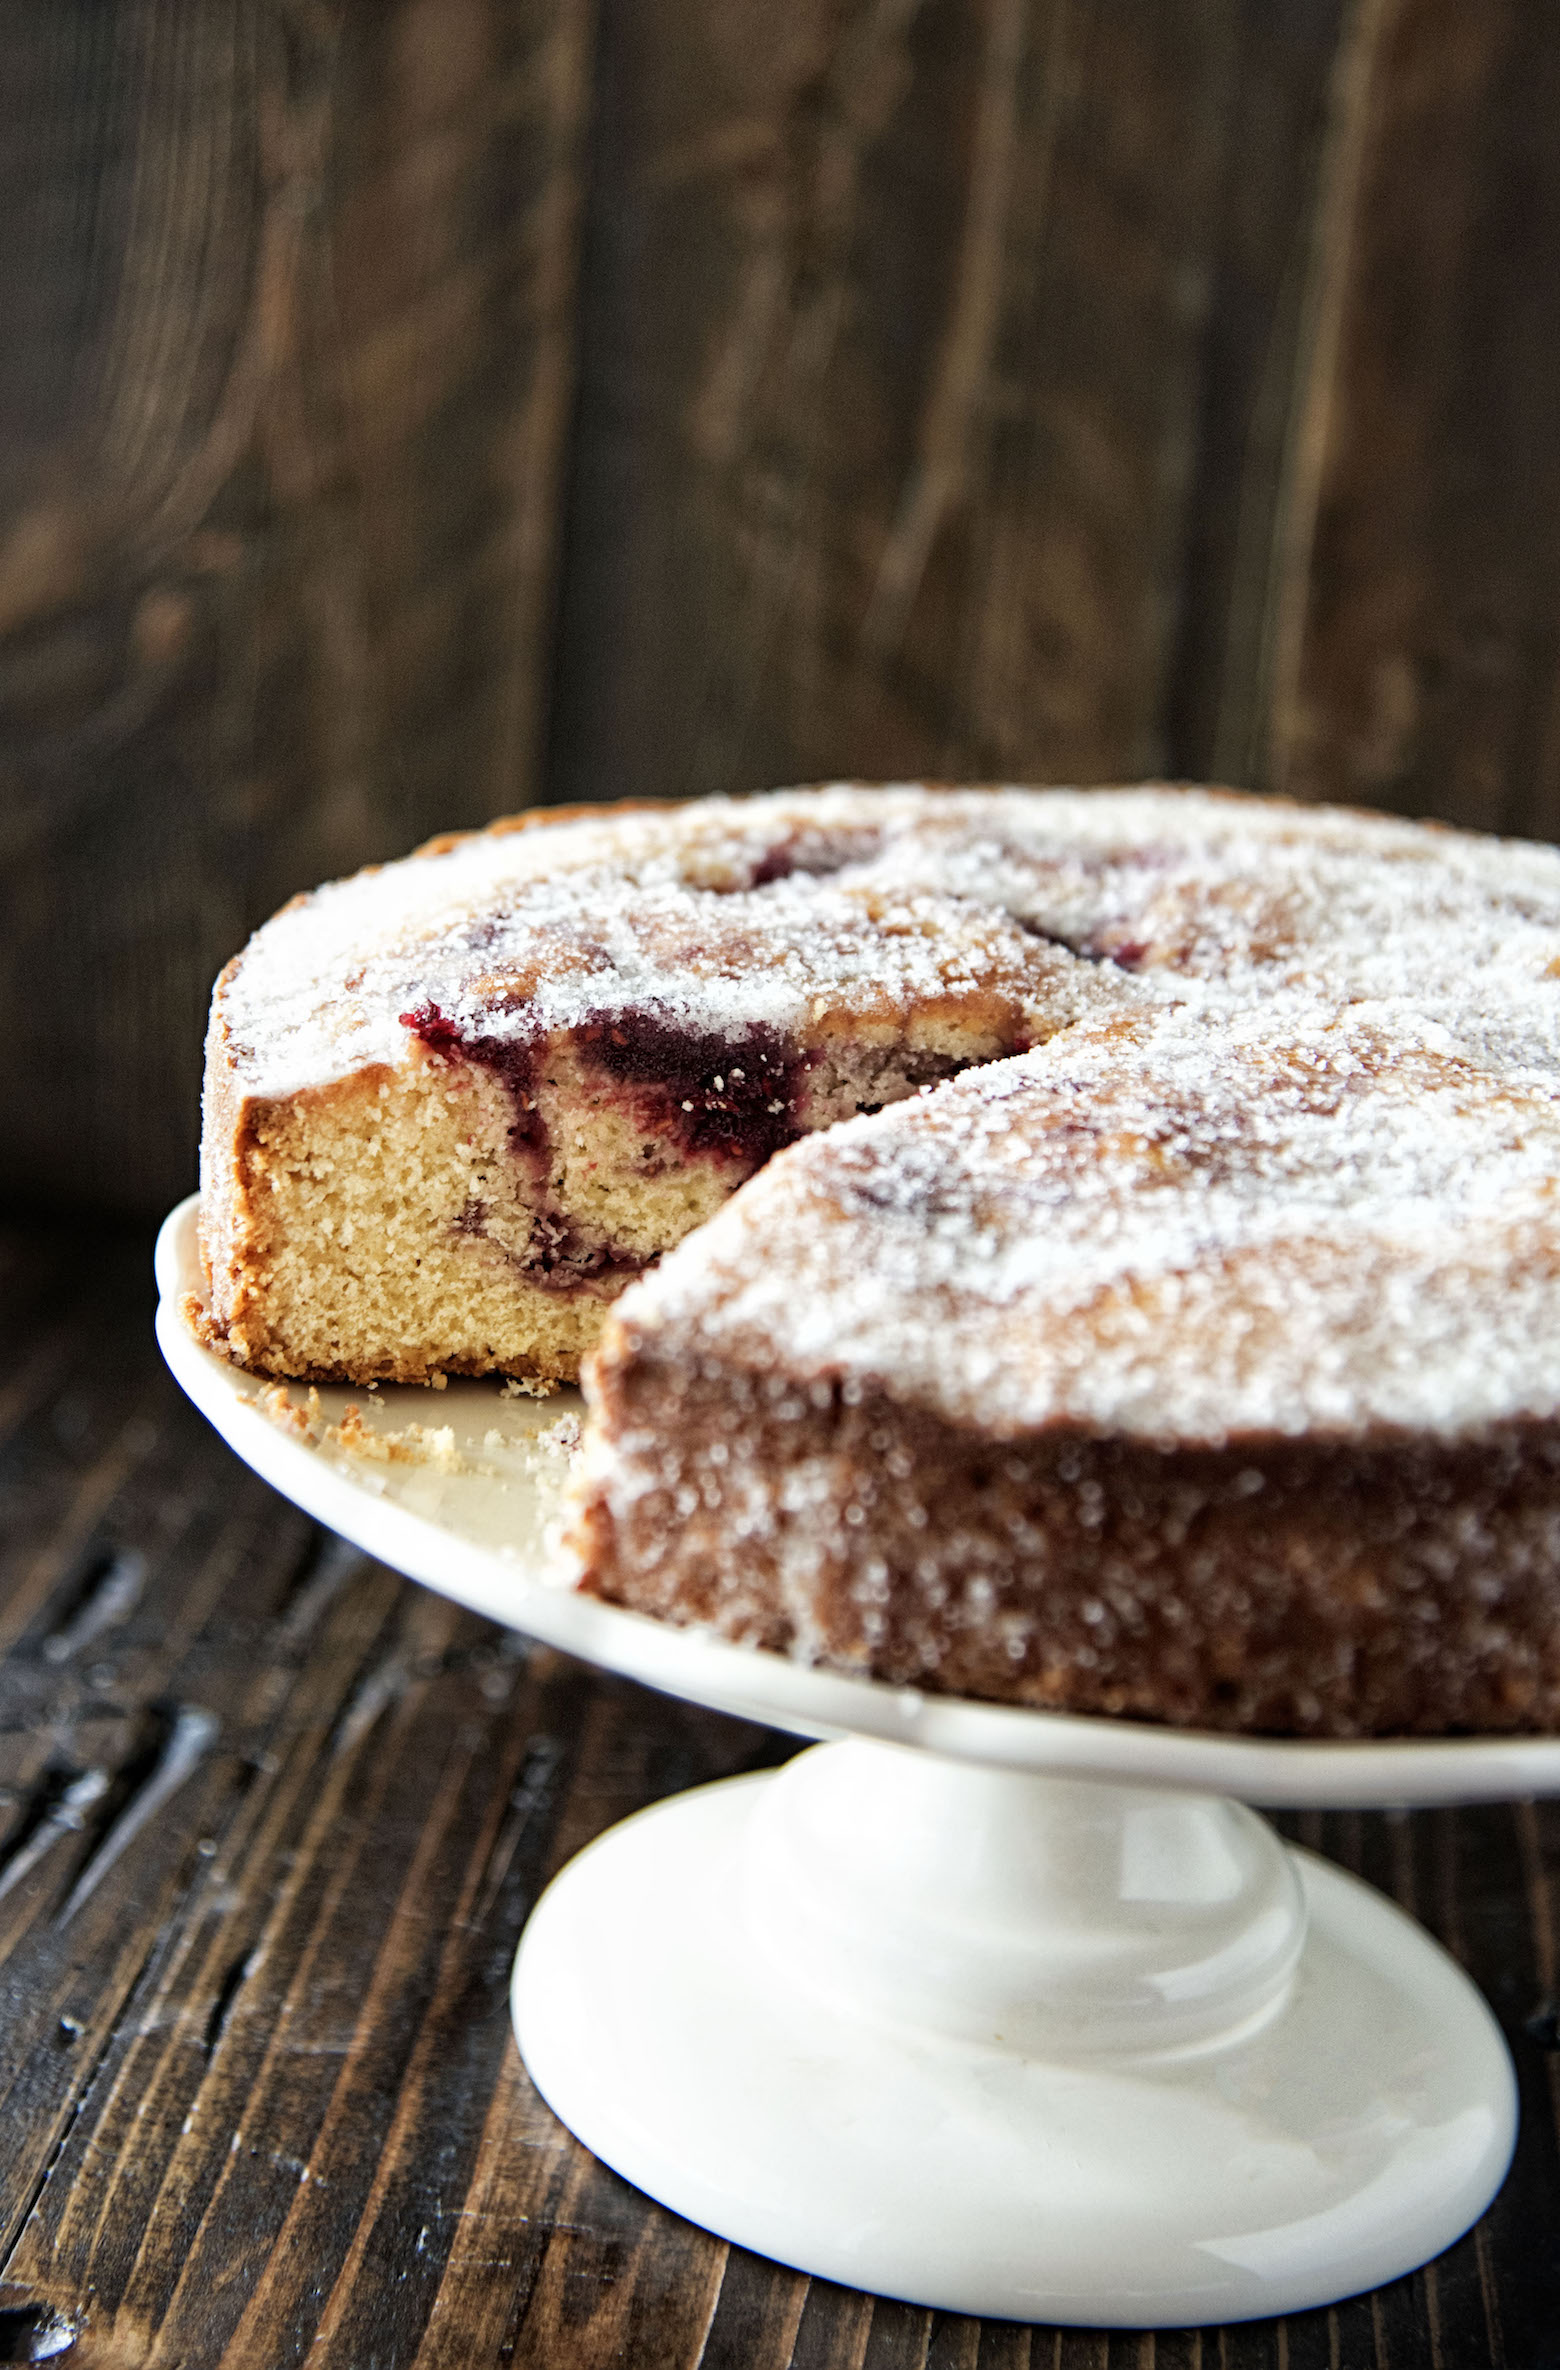 Sweet Corn and Berry Sugared Donut Cake